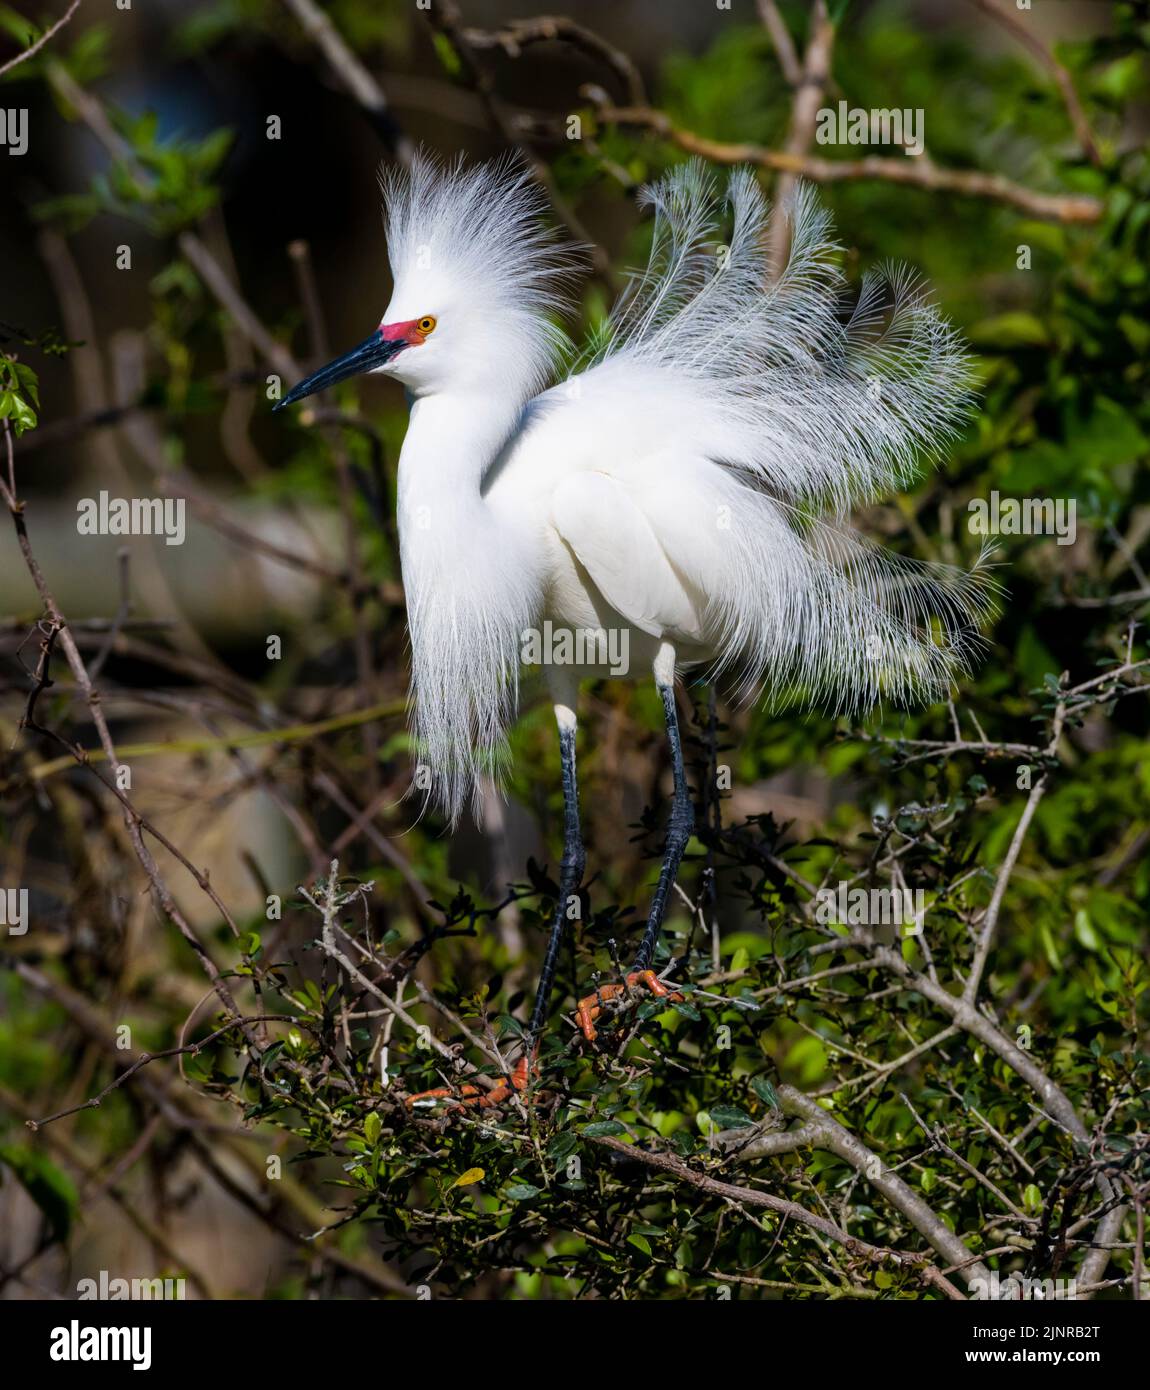 Snowy Egret (Egretta thula). Displaying in a rookery.  St. Augustine, Florida. Stock Photo